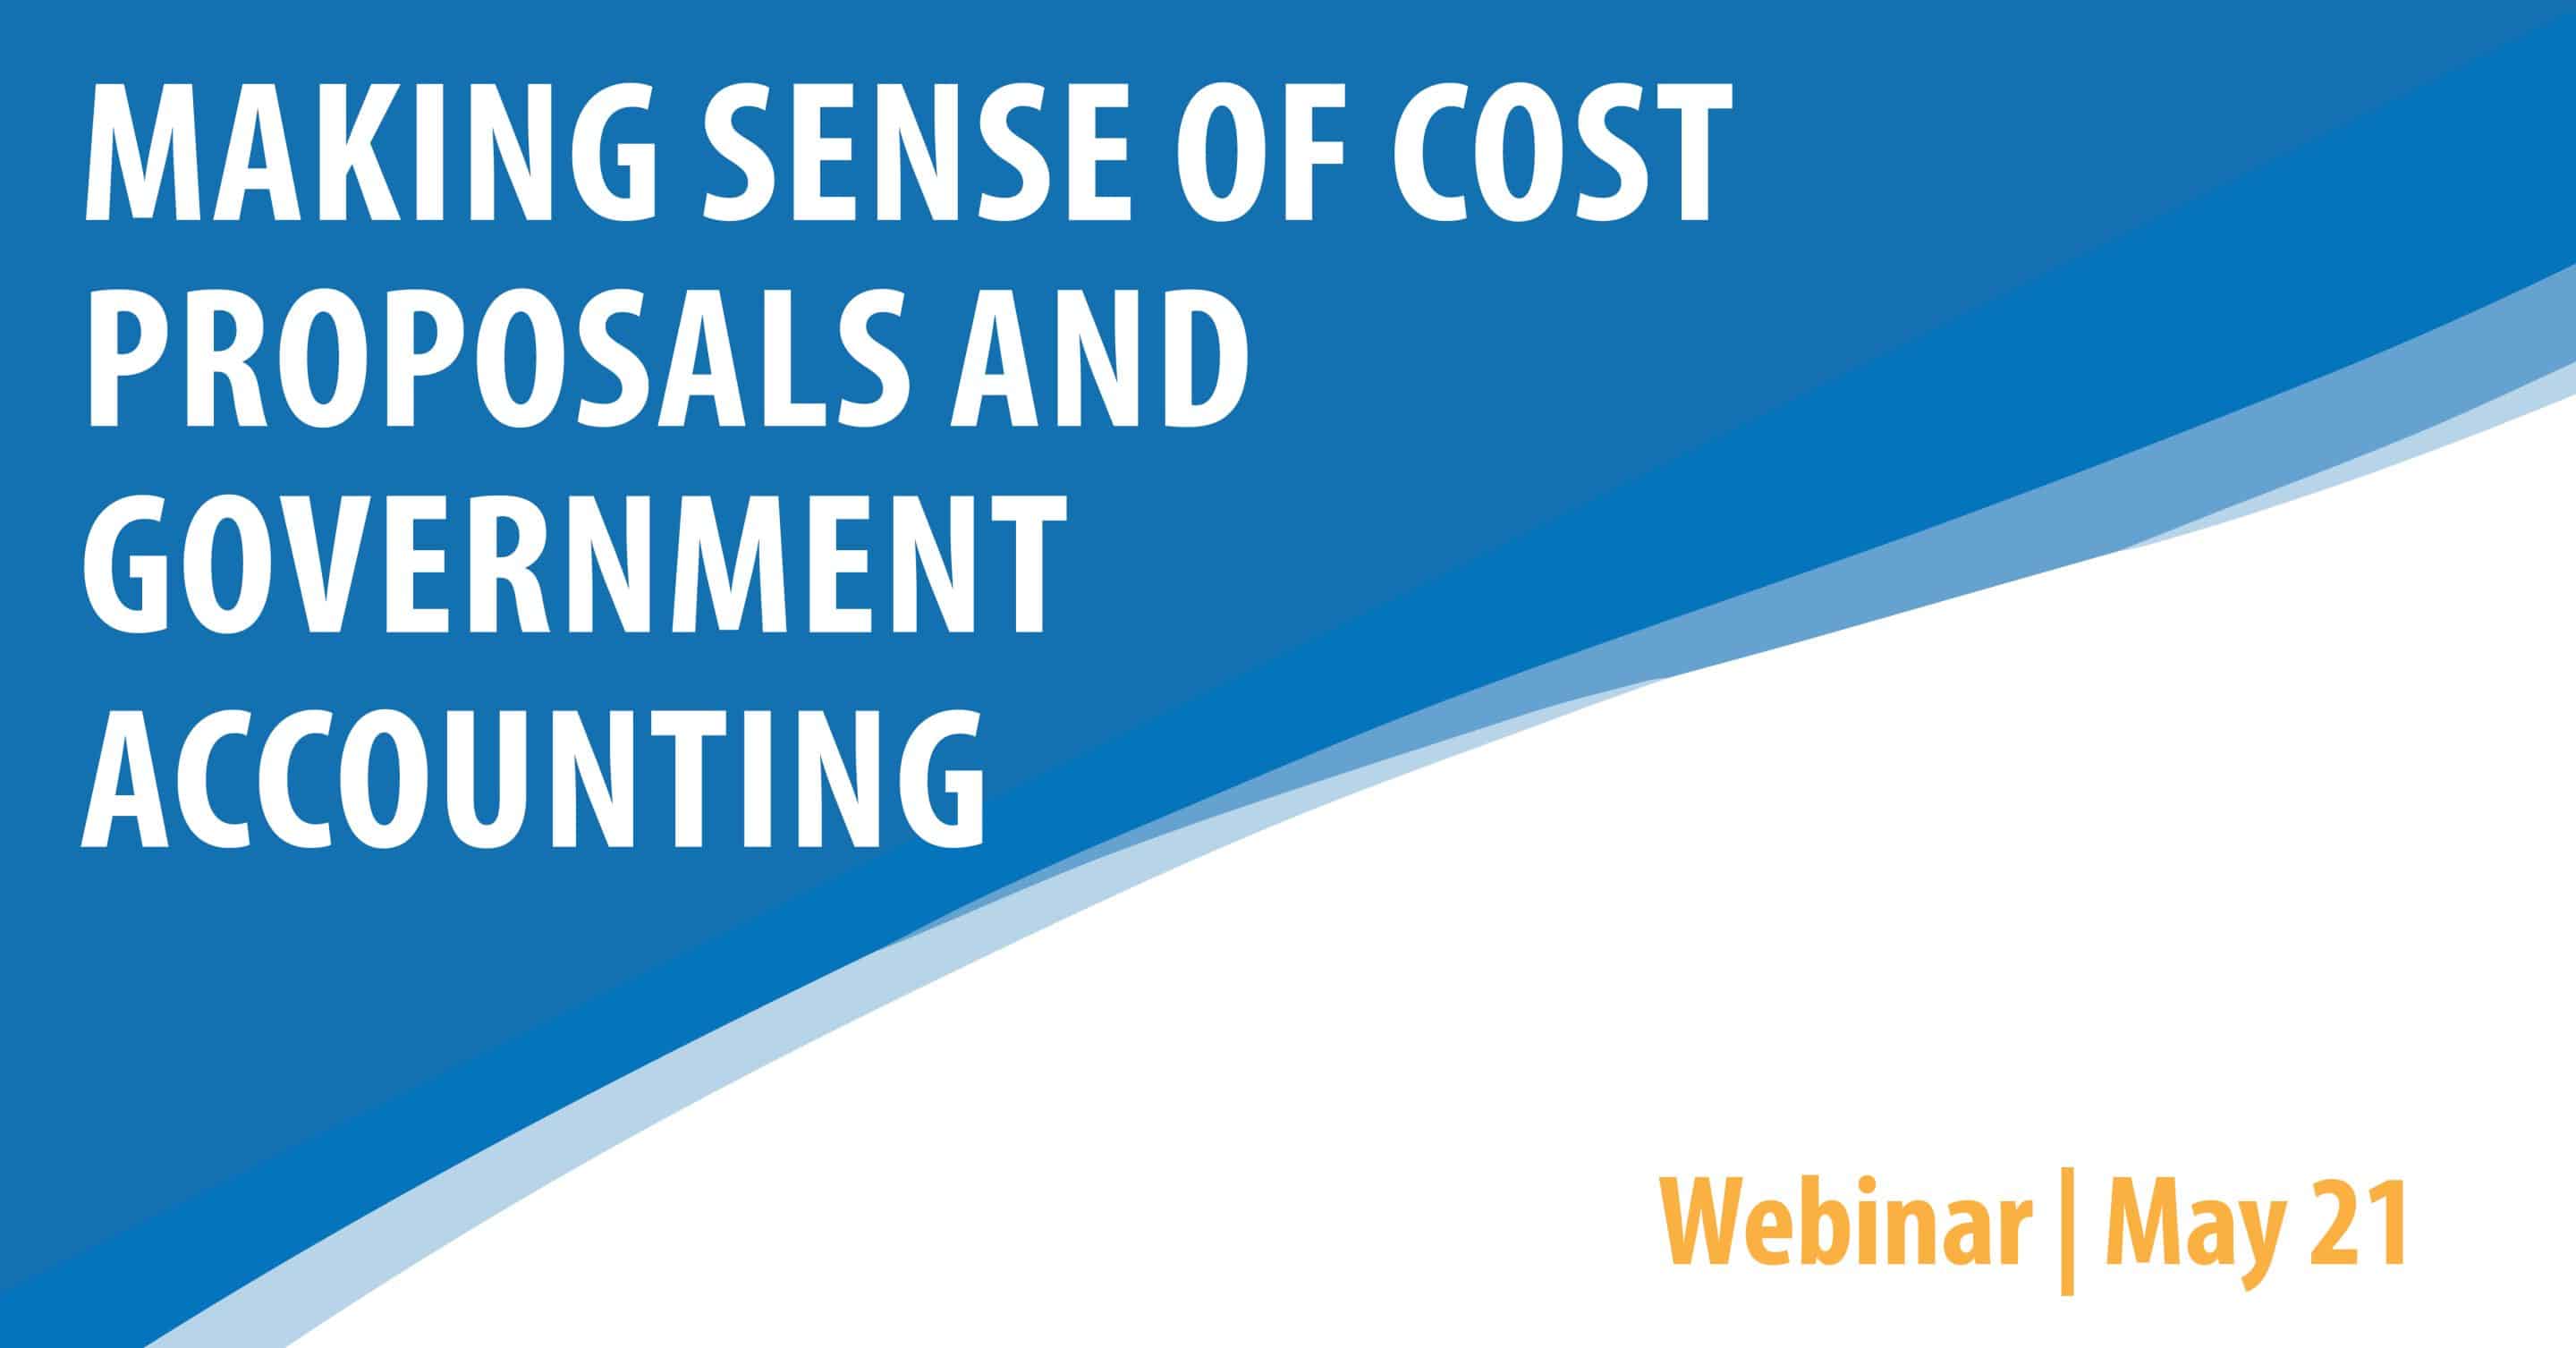 Making Sense of Cost Proposals and Government Accounting